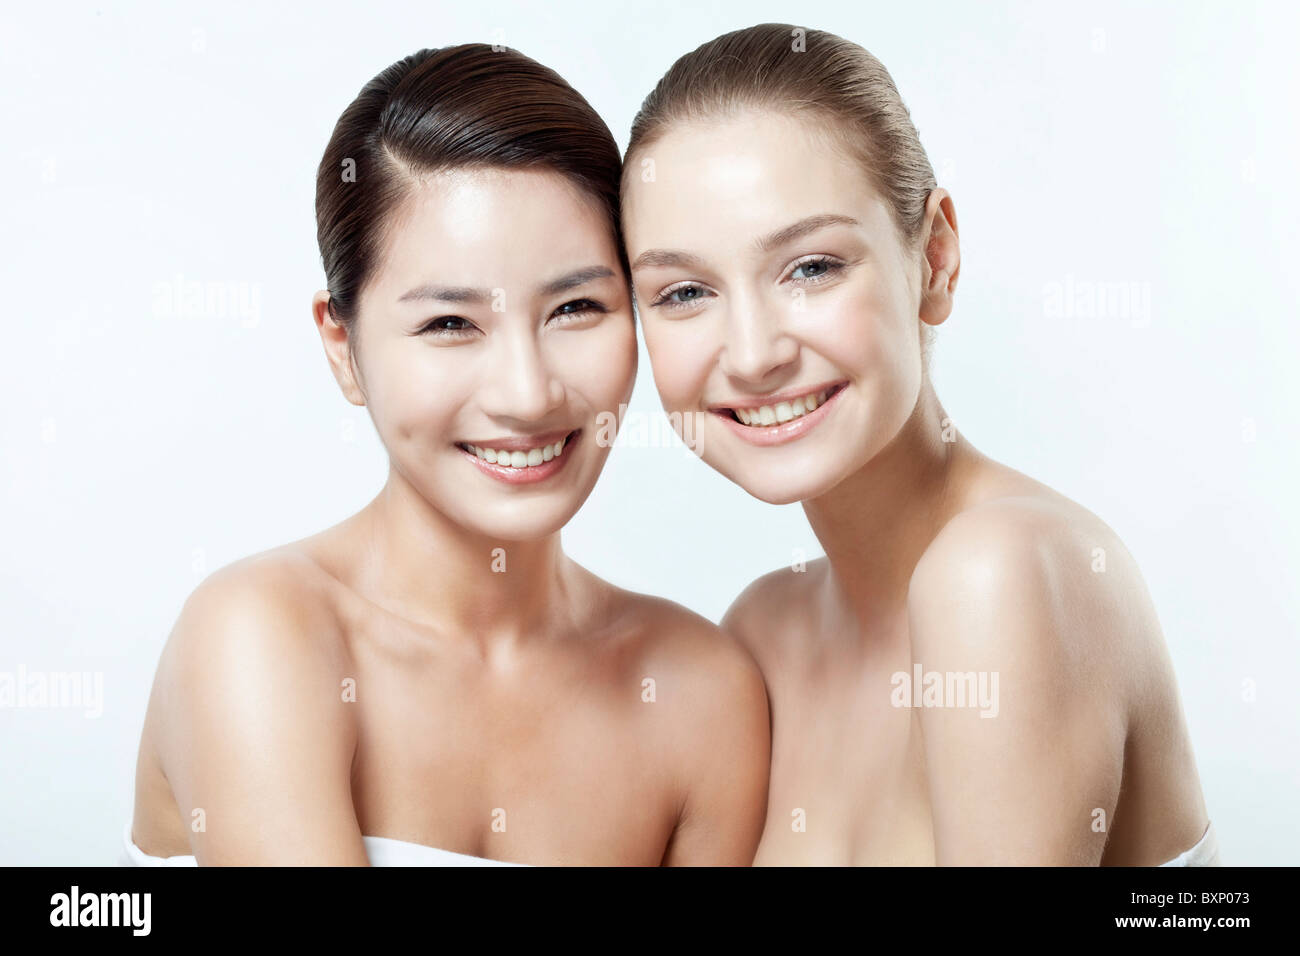 beauty shot of two young faces side by side Stock Photo